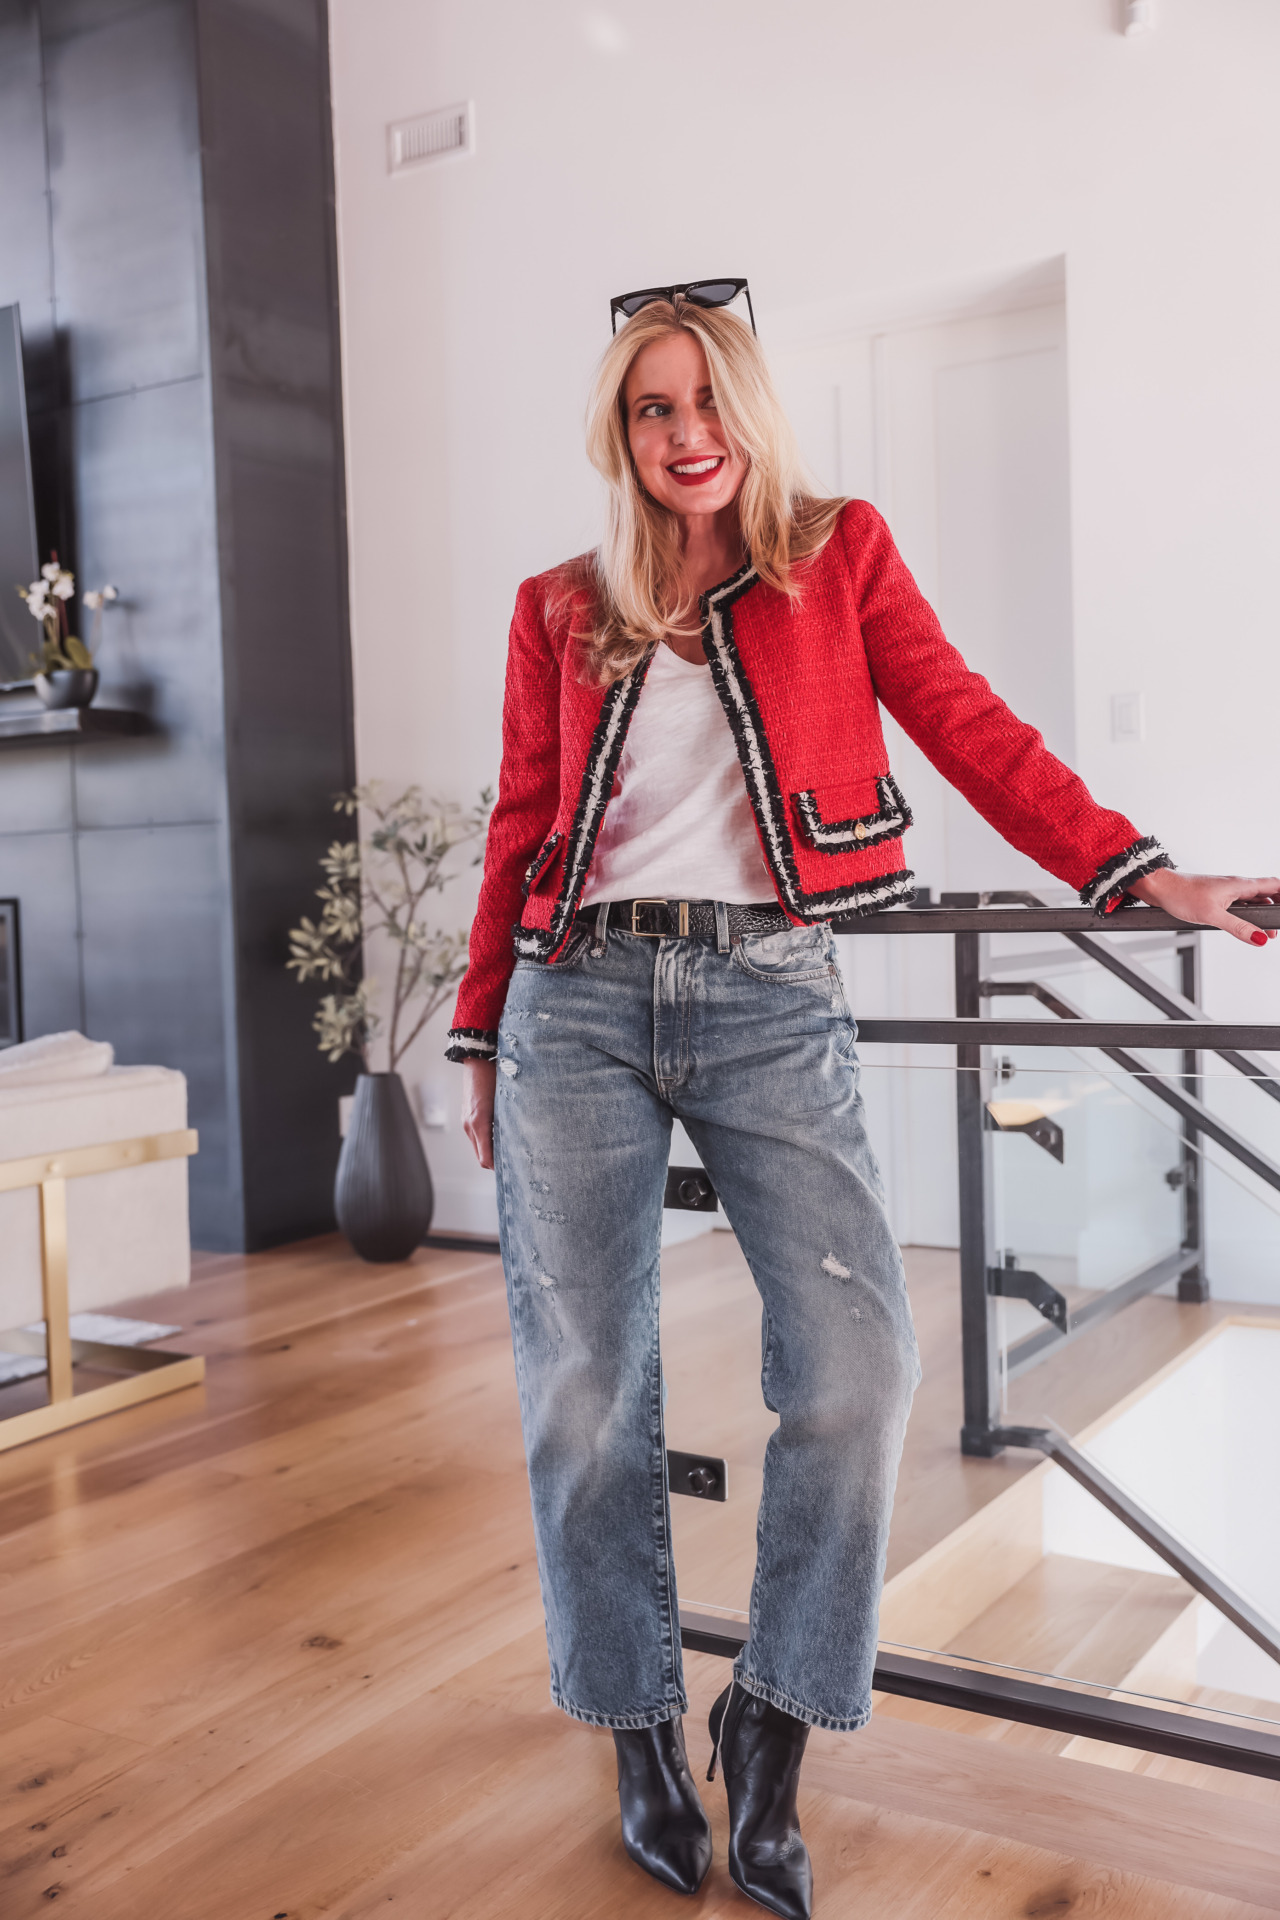 Lady Jacket Vintage Inspired Trend: 2 Ways To Wear It This Fall